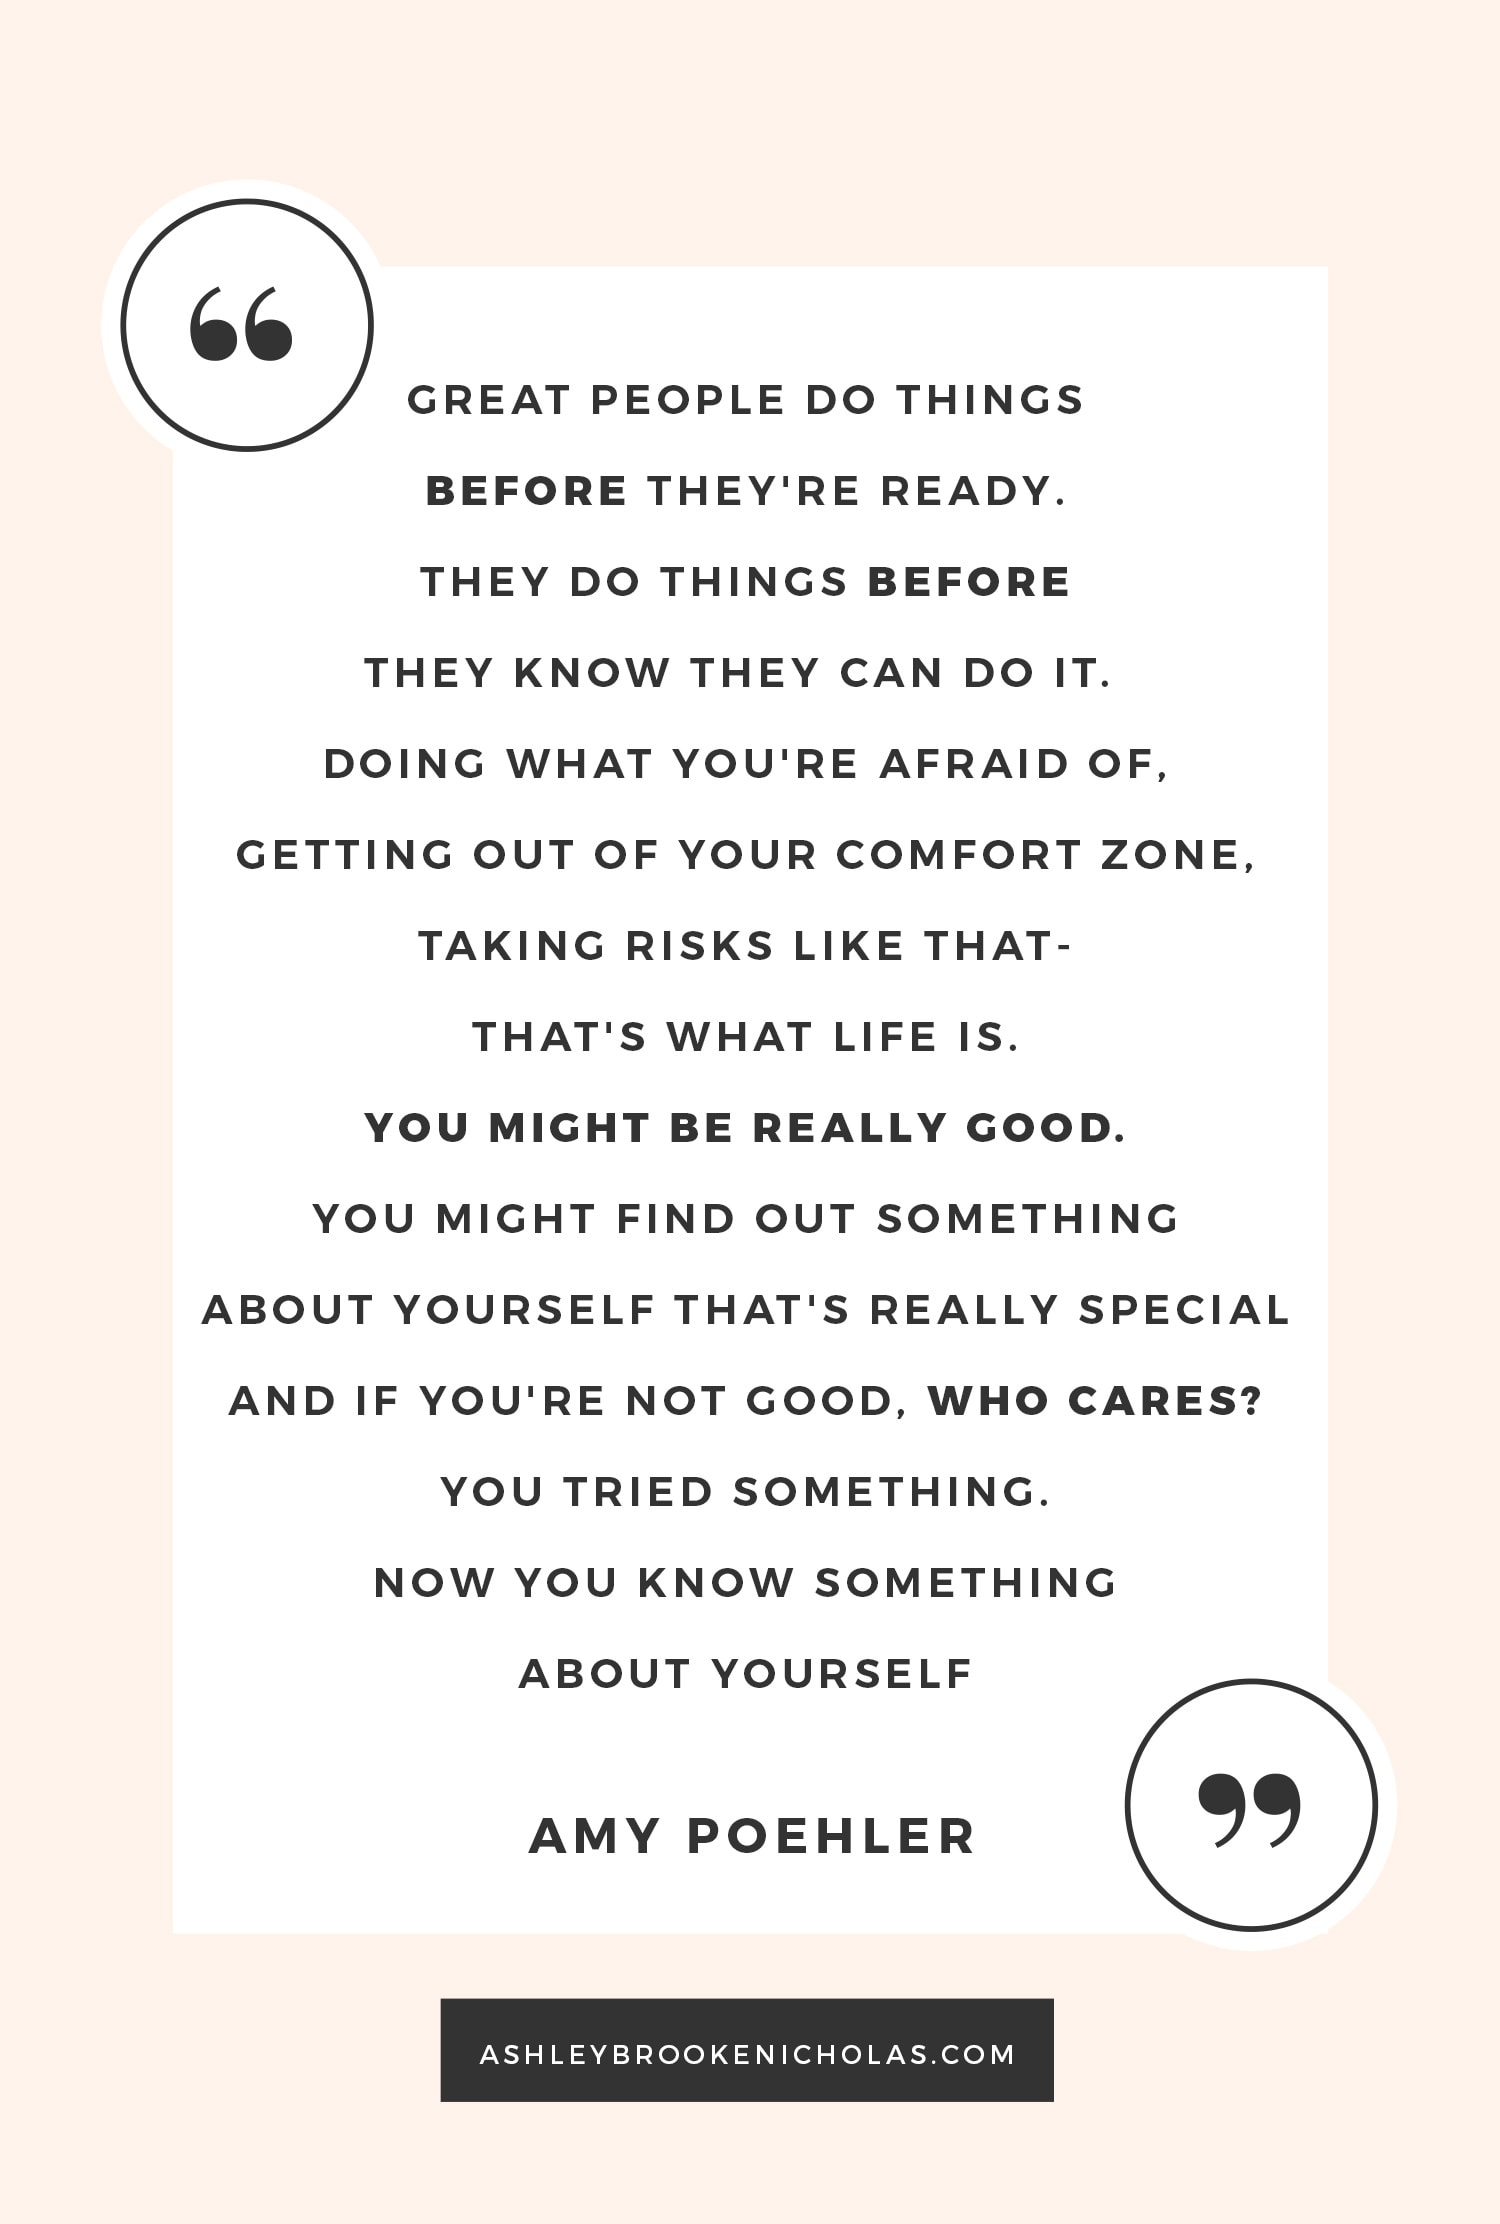 The Best Amy Poehler and Tina Fey Quotes | "Great people do things before they're ready. They do things before they know they can do it. Doing what you're afraid of, getting out of your comfort zone, taking risks like that- that's what life is. You might be really good. You might find out something about yourself that's really special. And if you're not good, who cares? You tried something. Now you know something about yourself."